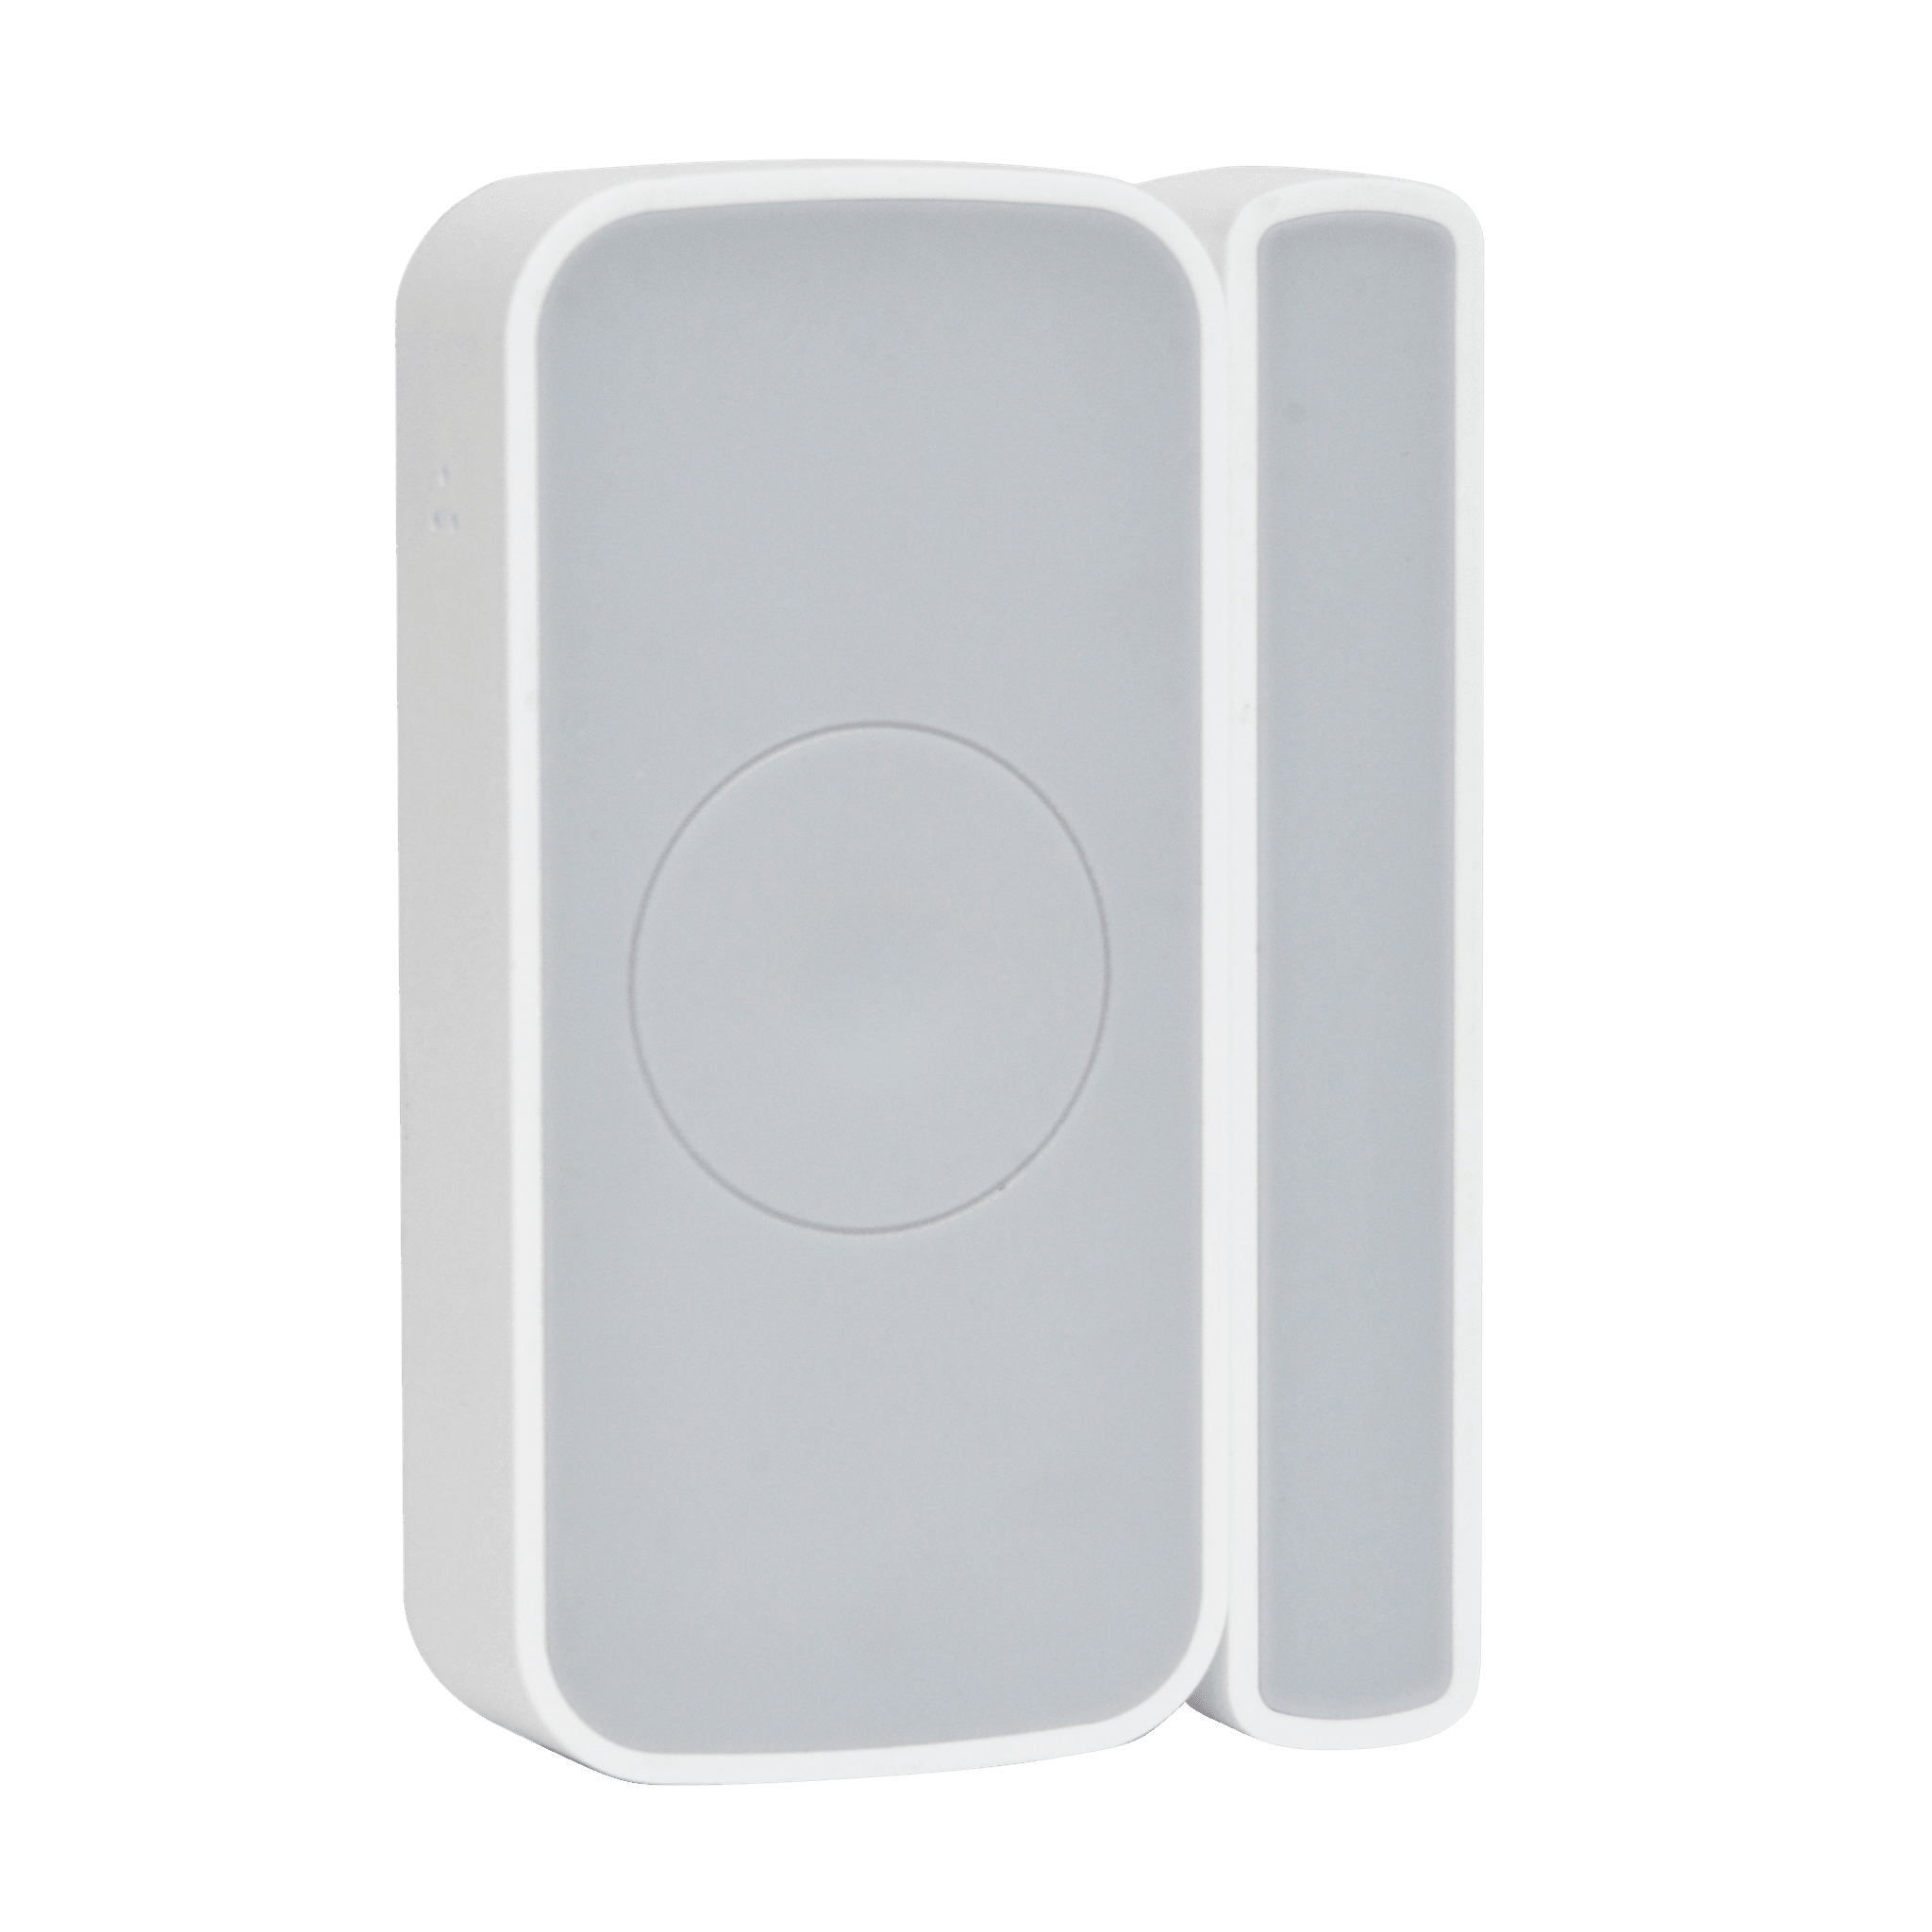 Z-Wave Smart Home Monitoring Kit - IOTREND